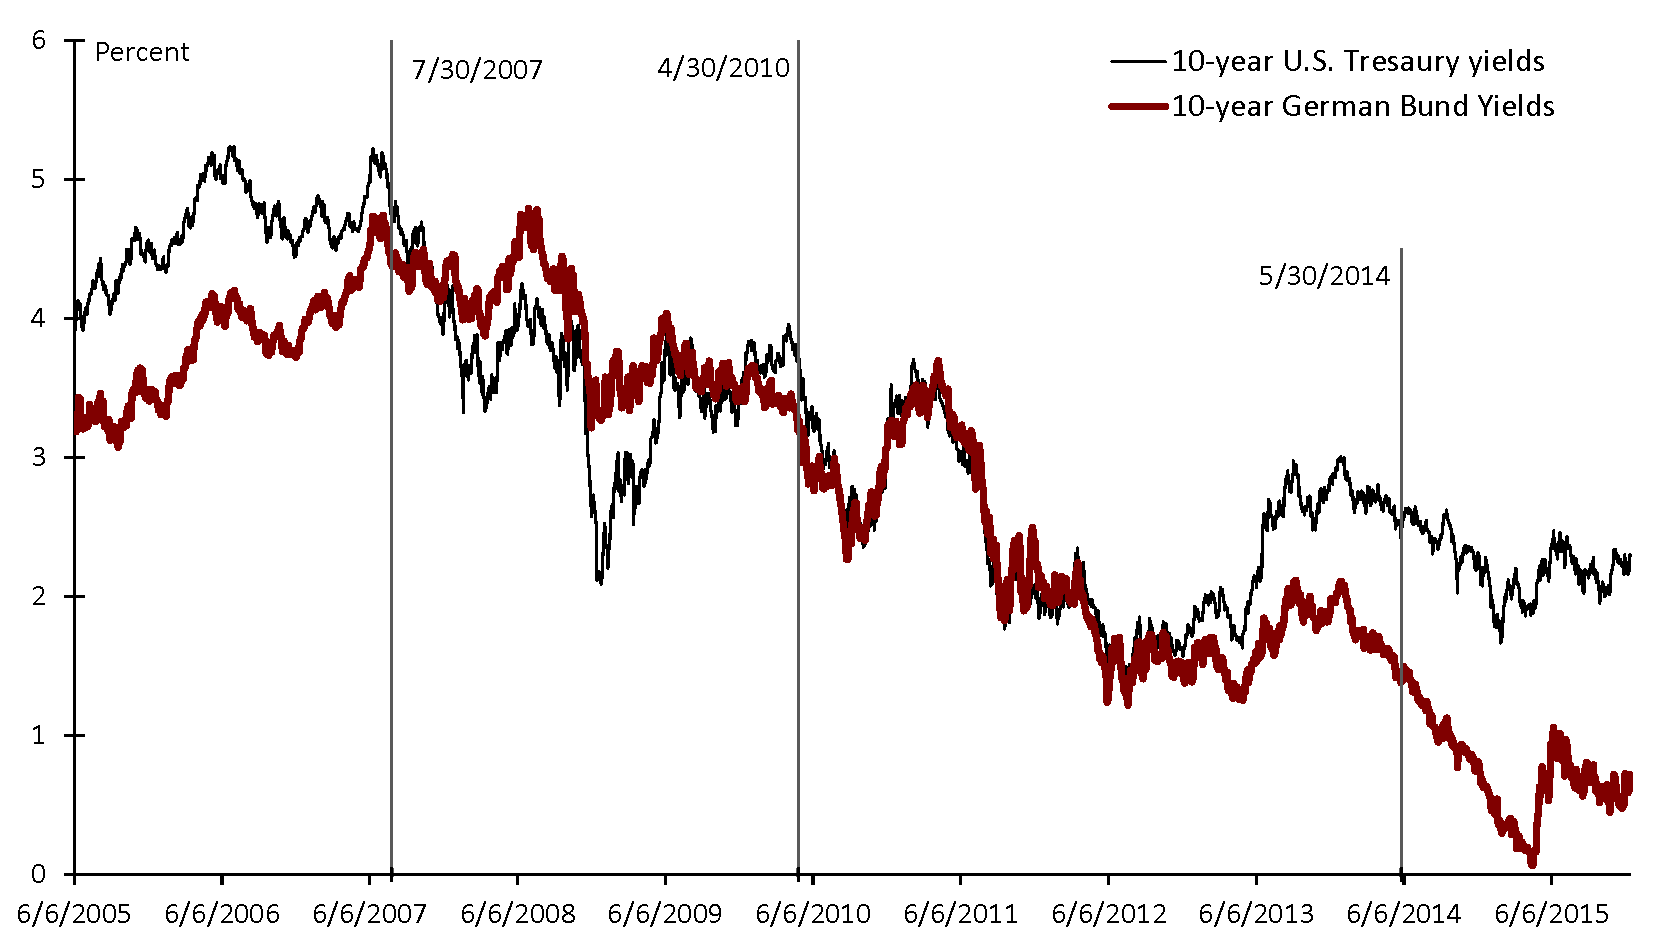 Figure 1: U.S. and Euro-Area 10-Year Sovereign Bond Yields. See accessible link for data description.